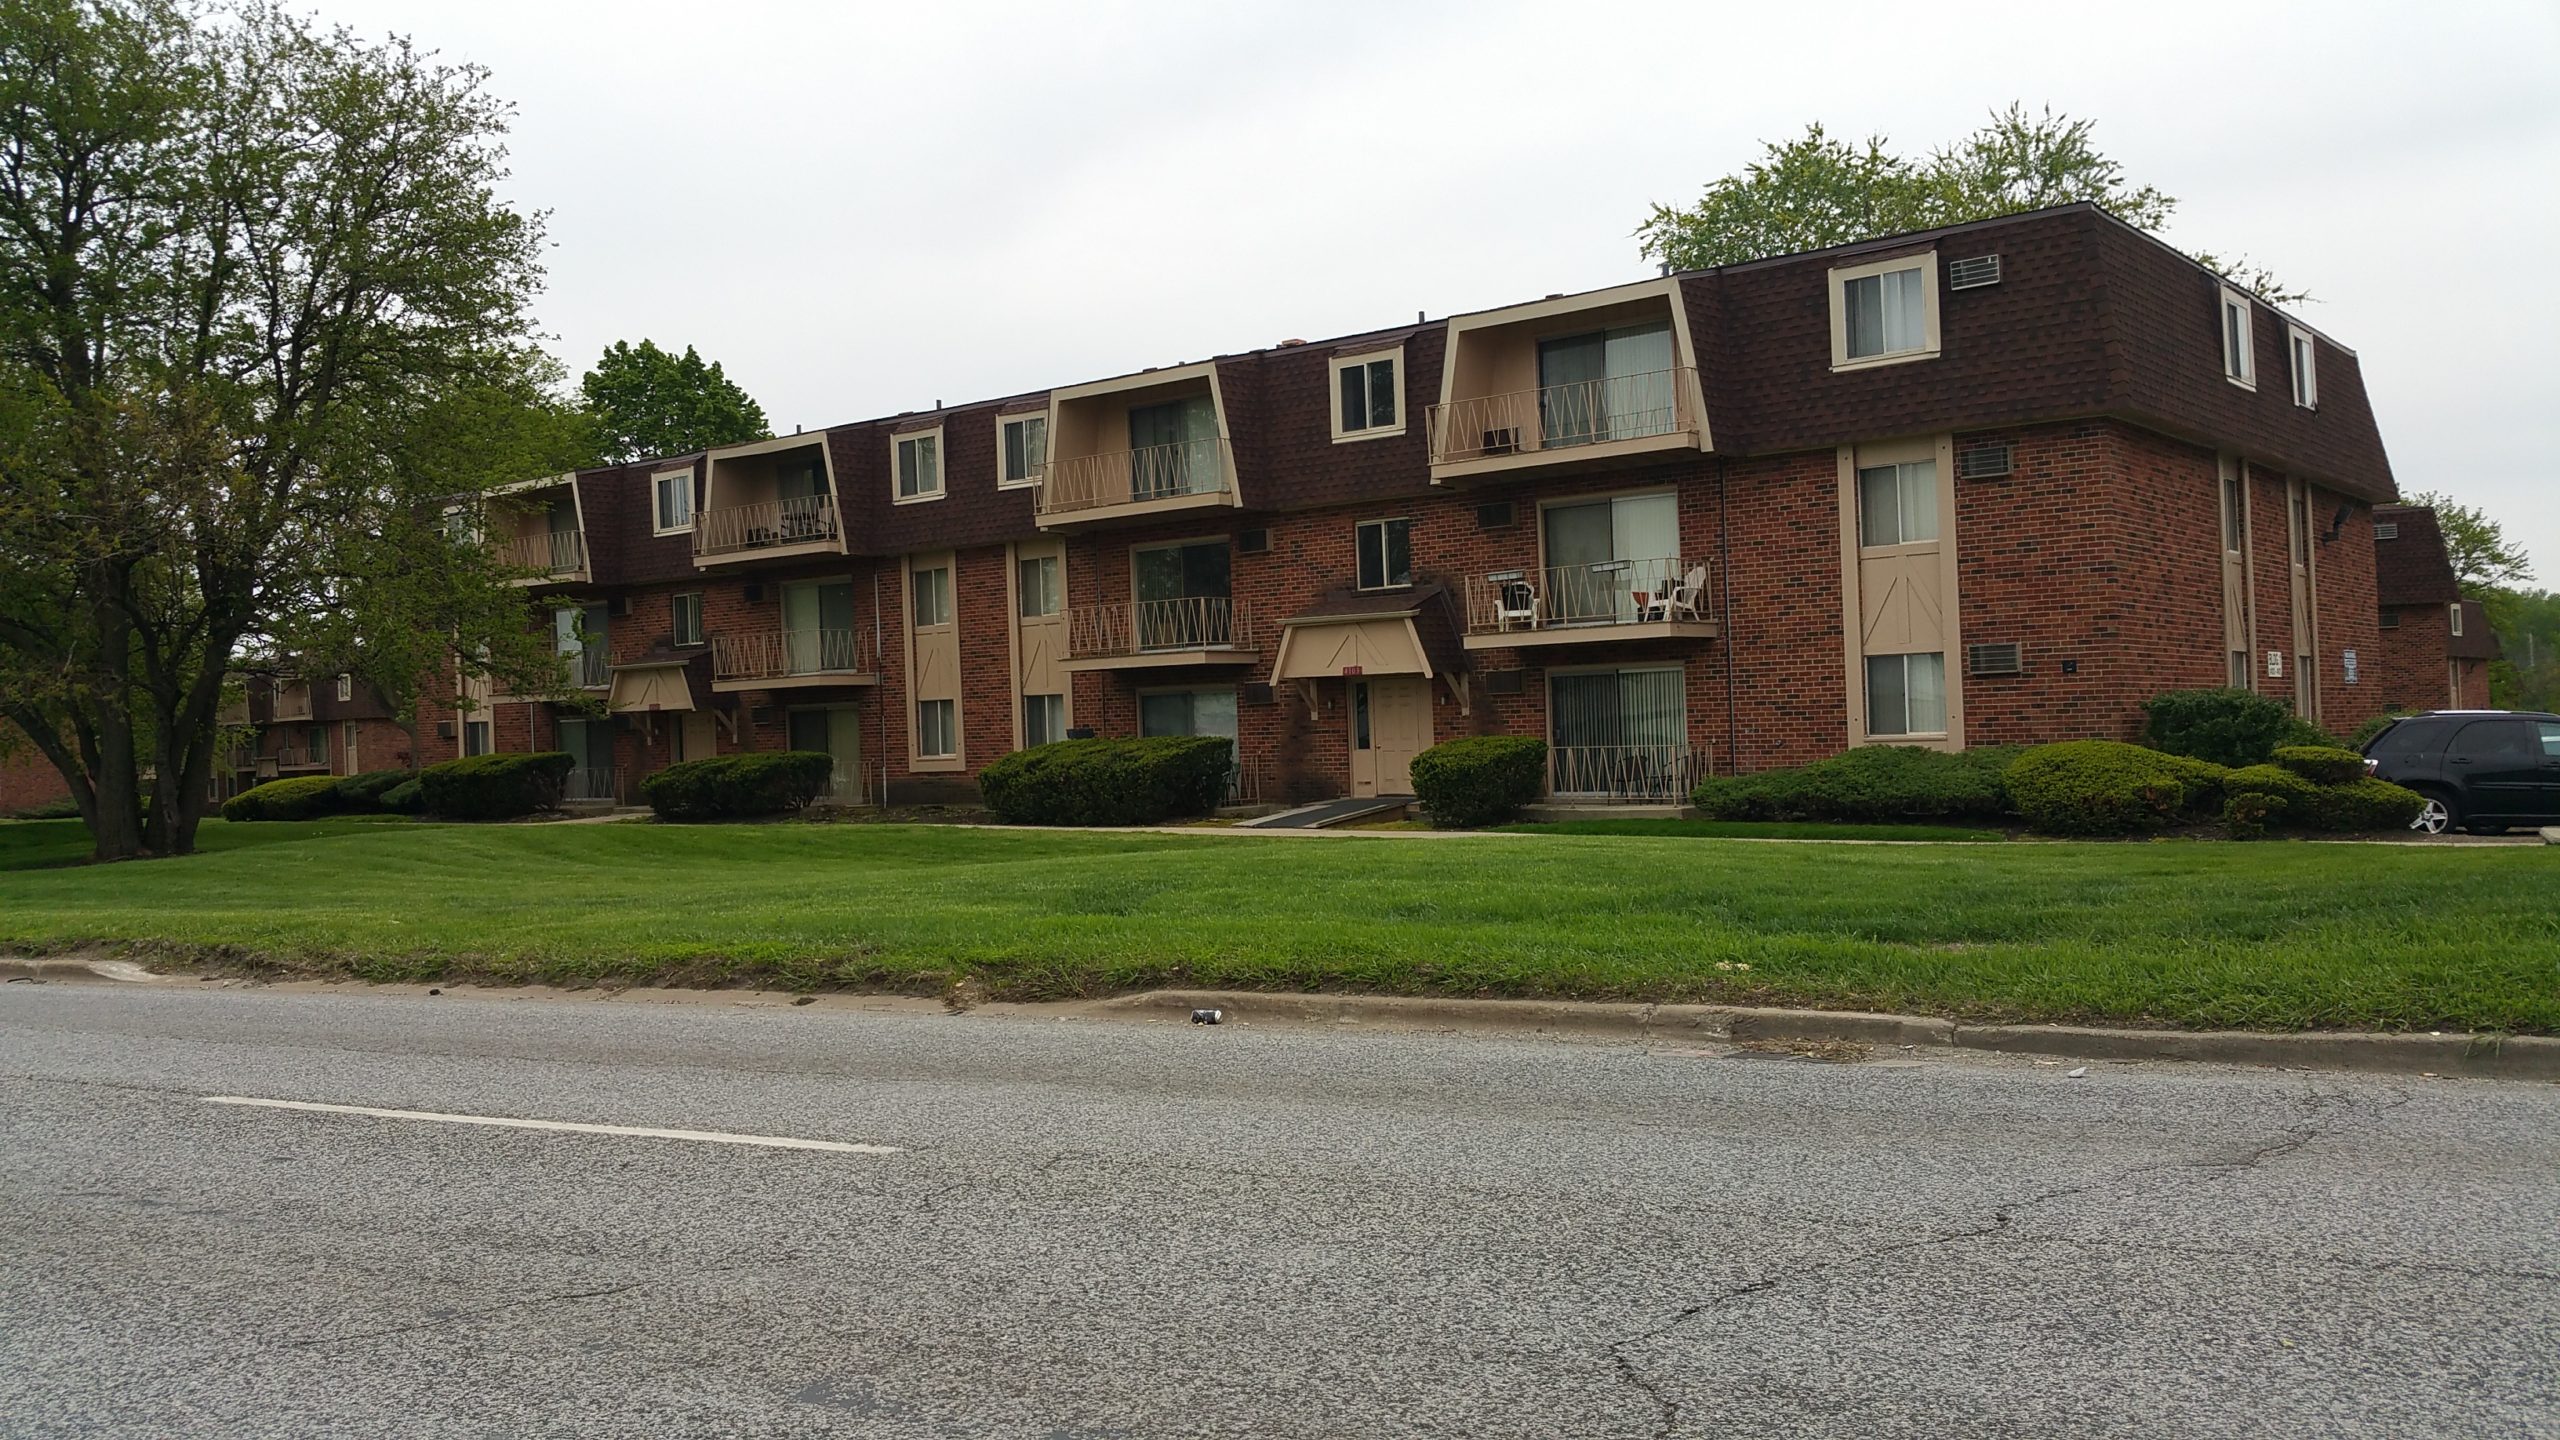 $19.7 million cash out refinance of 3 multifamily properties